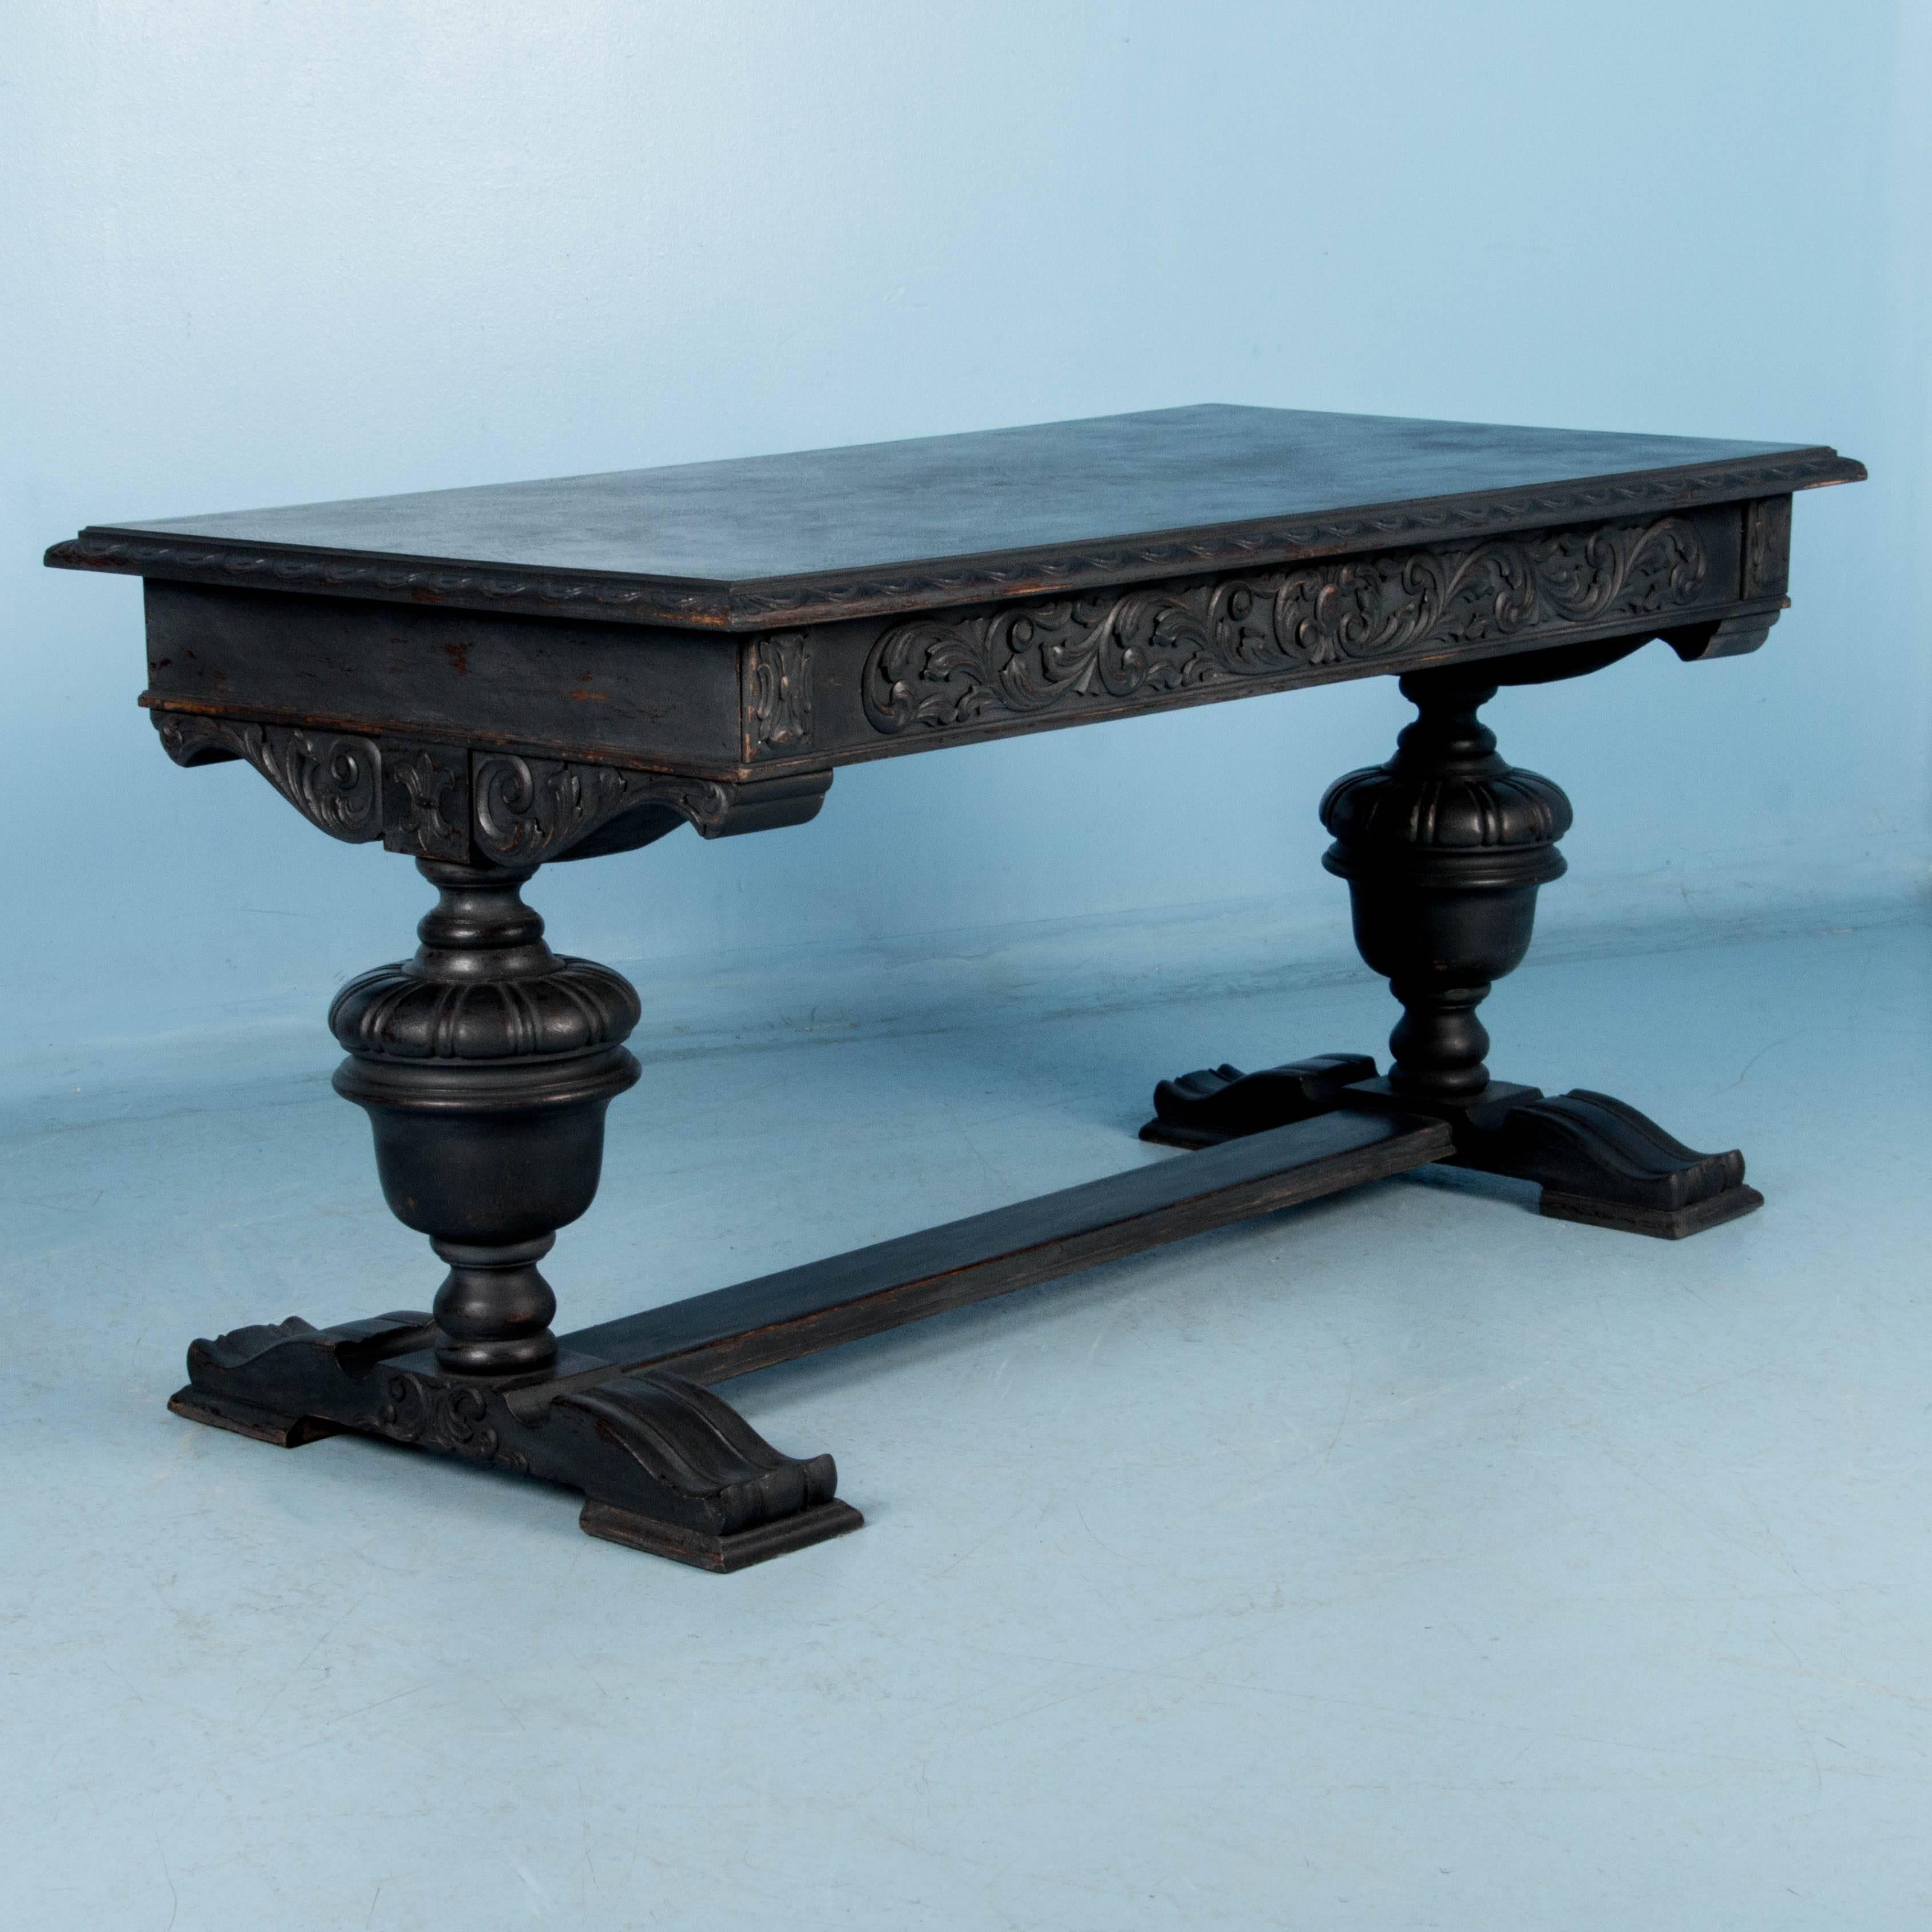 The black distressed chalk paint finish creates a texture that accentuates the style of this late 19th century library table with urn shaped legs and broad padded feet. Note how the lightly distressed paint exposes the dark rich wood beneath,